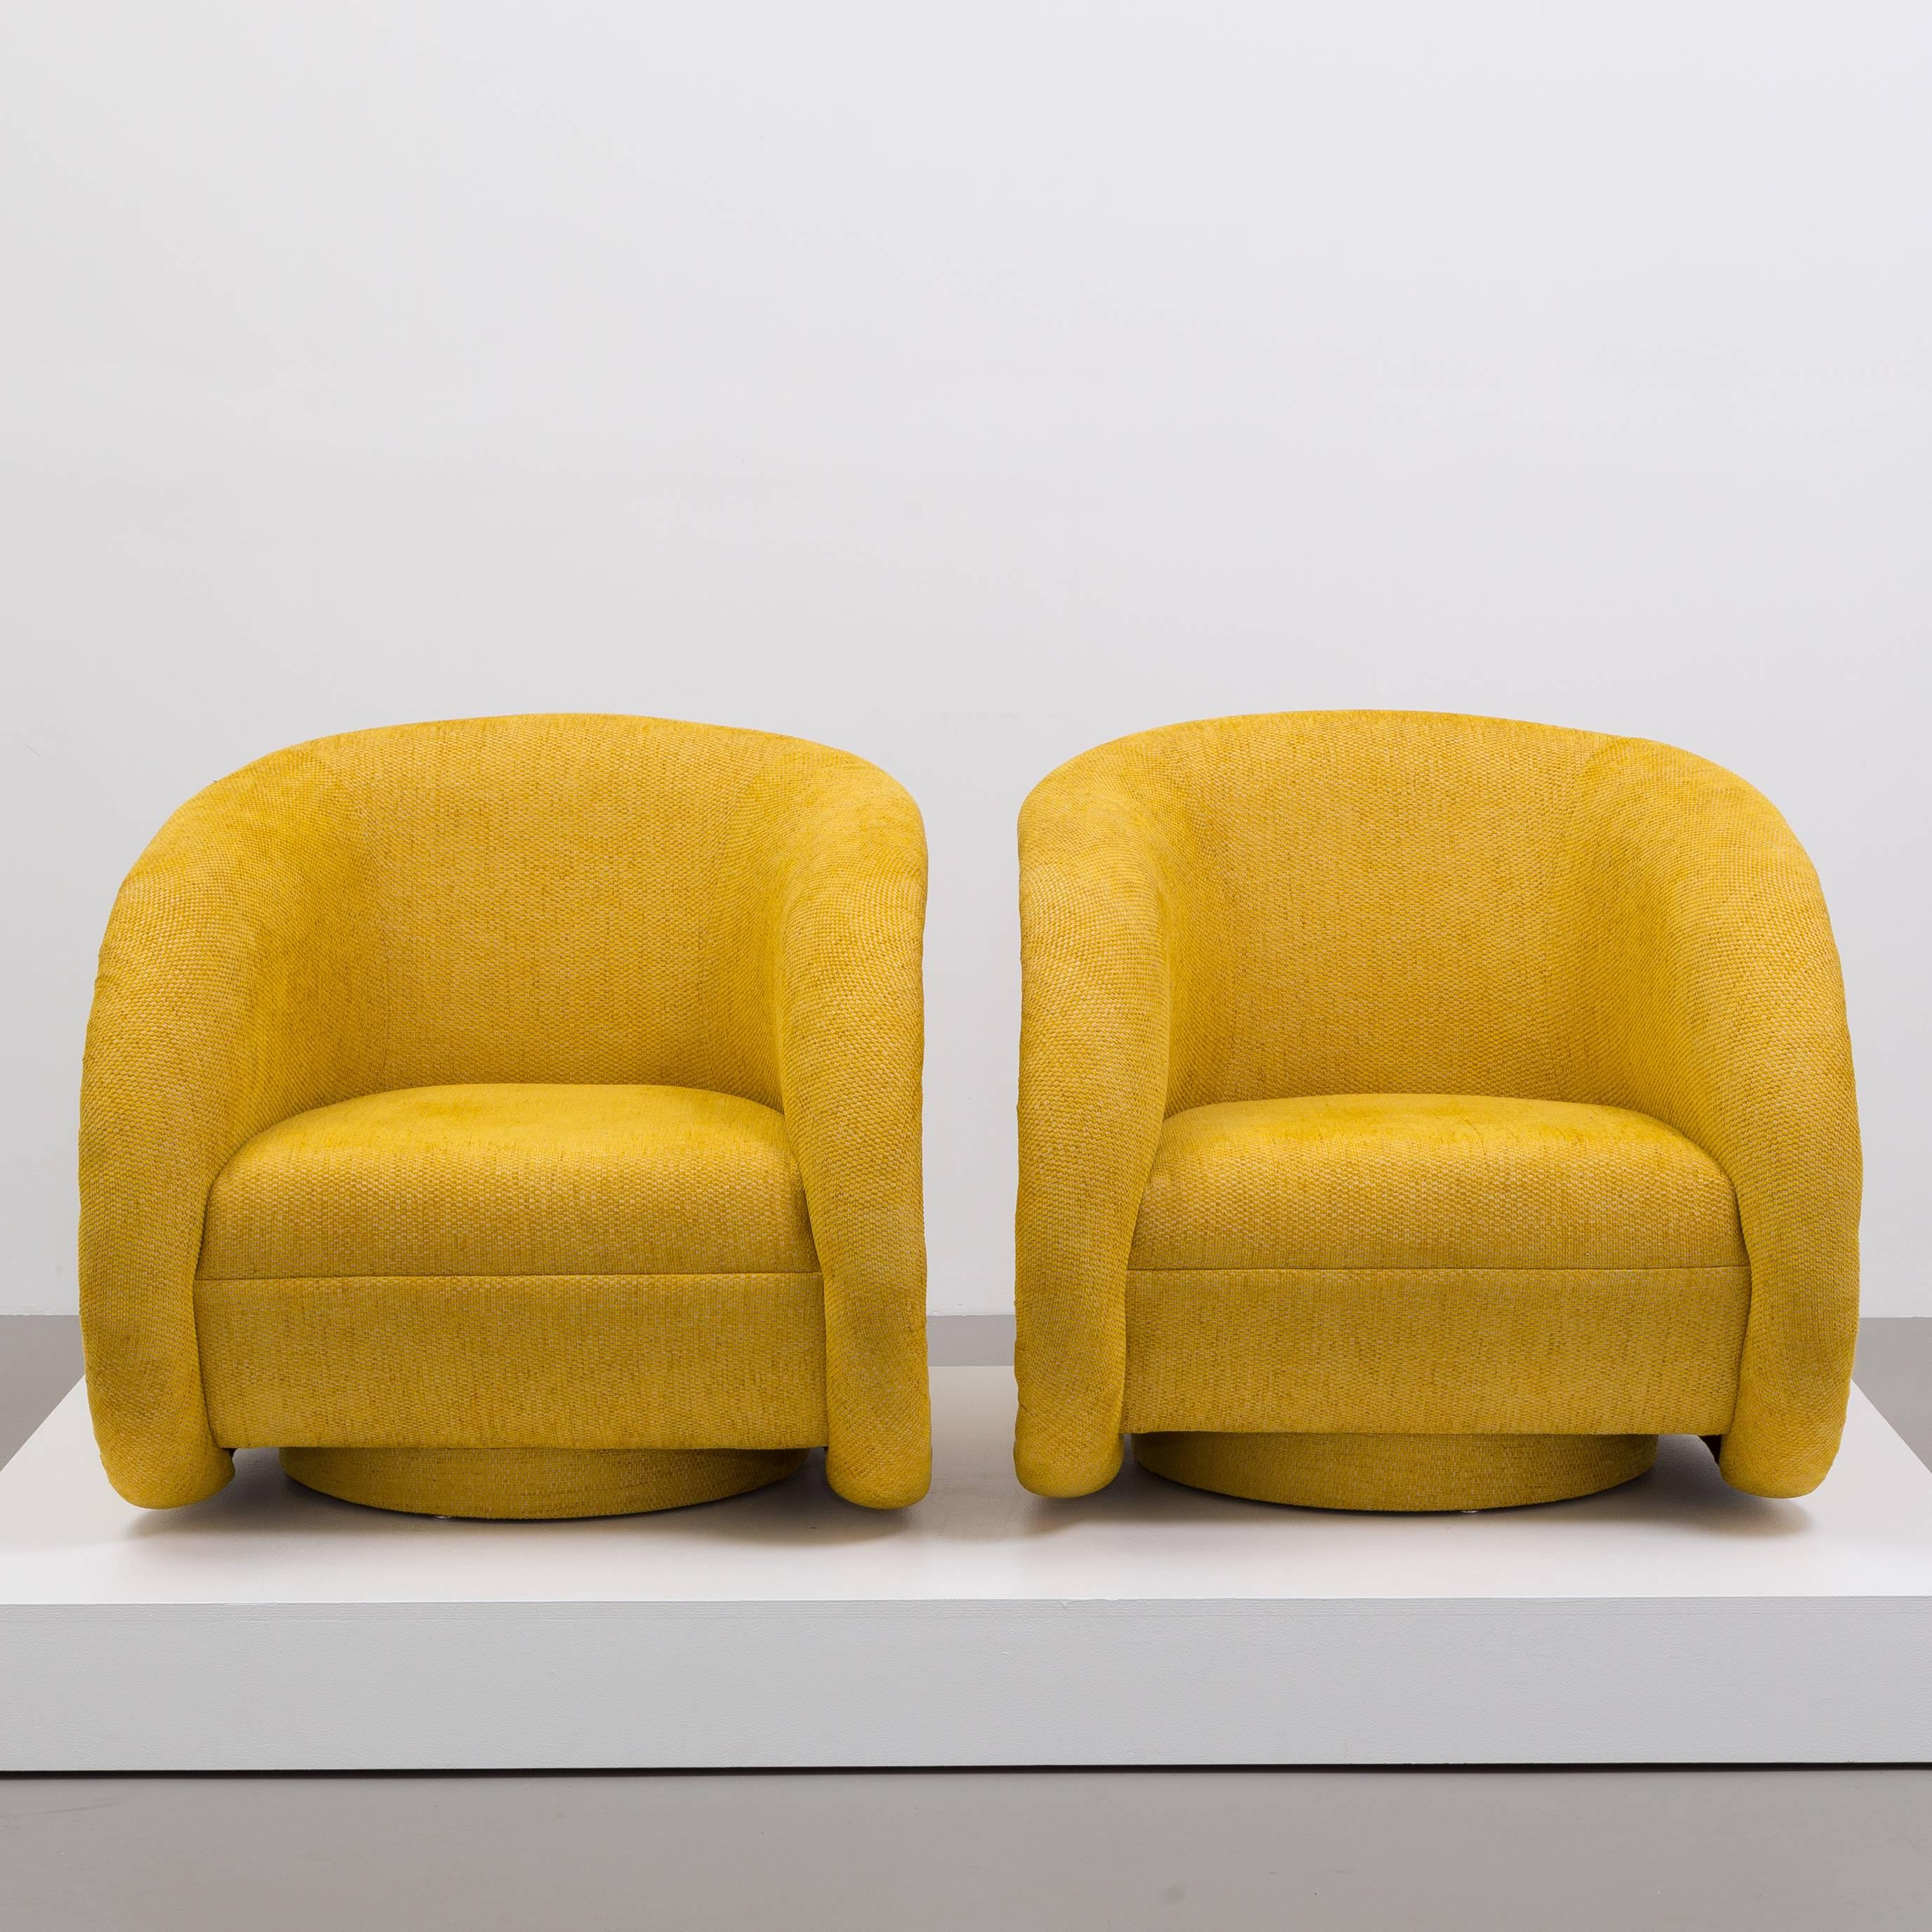 A large pair of upholstered swivel chairs, USA, mid-1990s. Fully rebuilt and reupholstered by Talisman

Price includes 20% VAT which is removed for items shipped outside the EU.